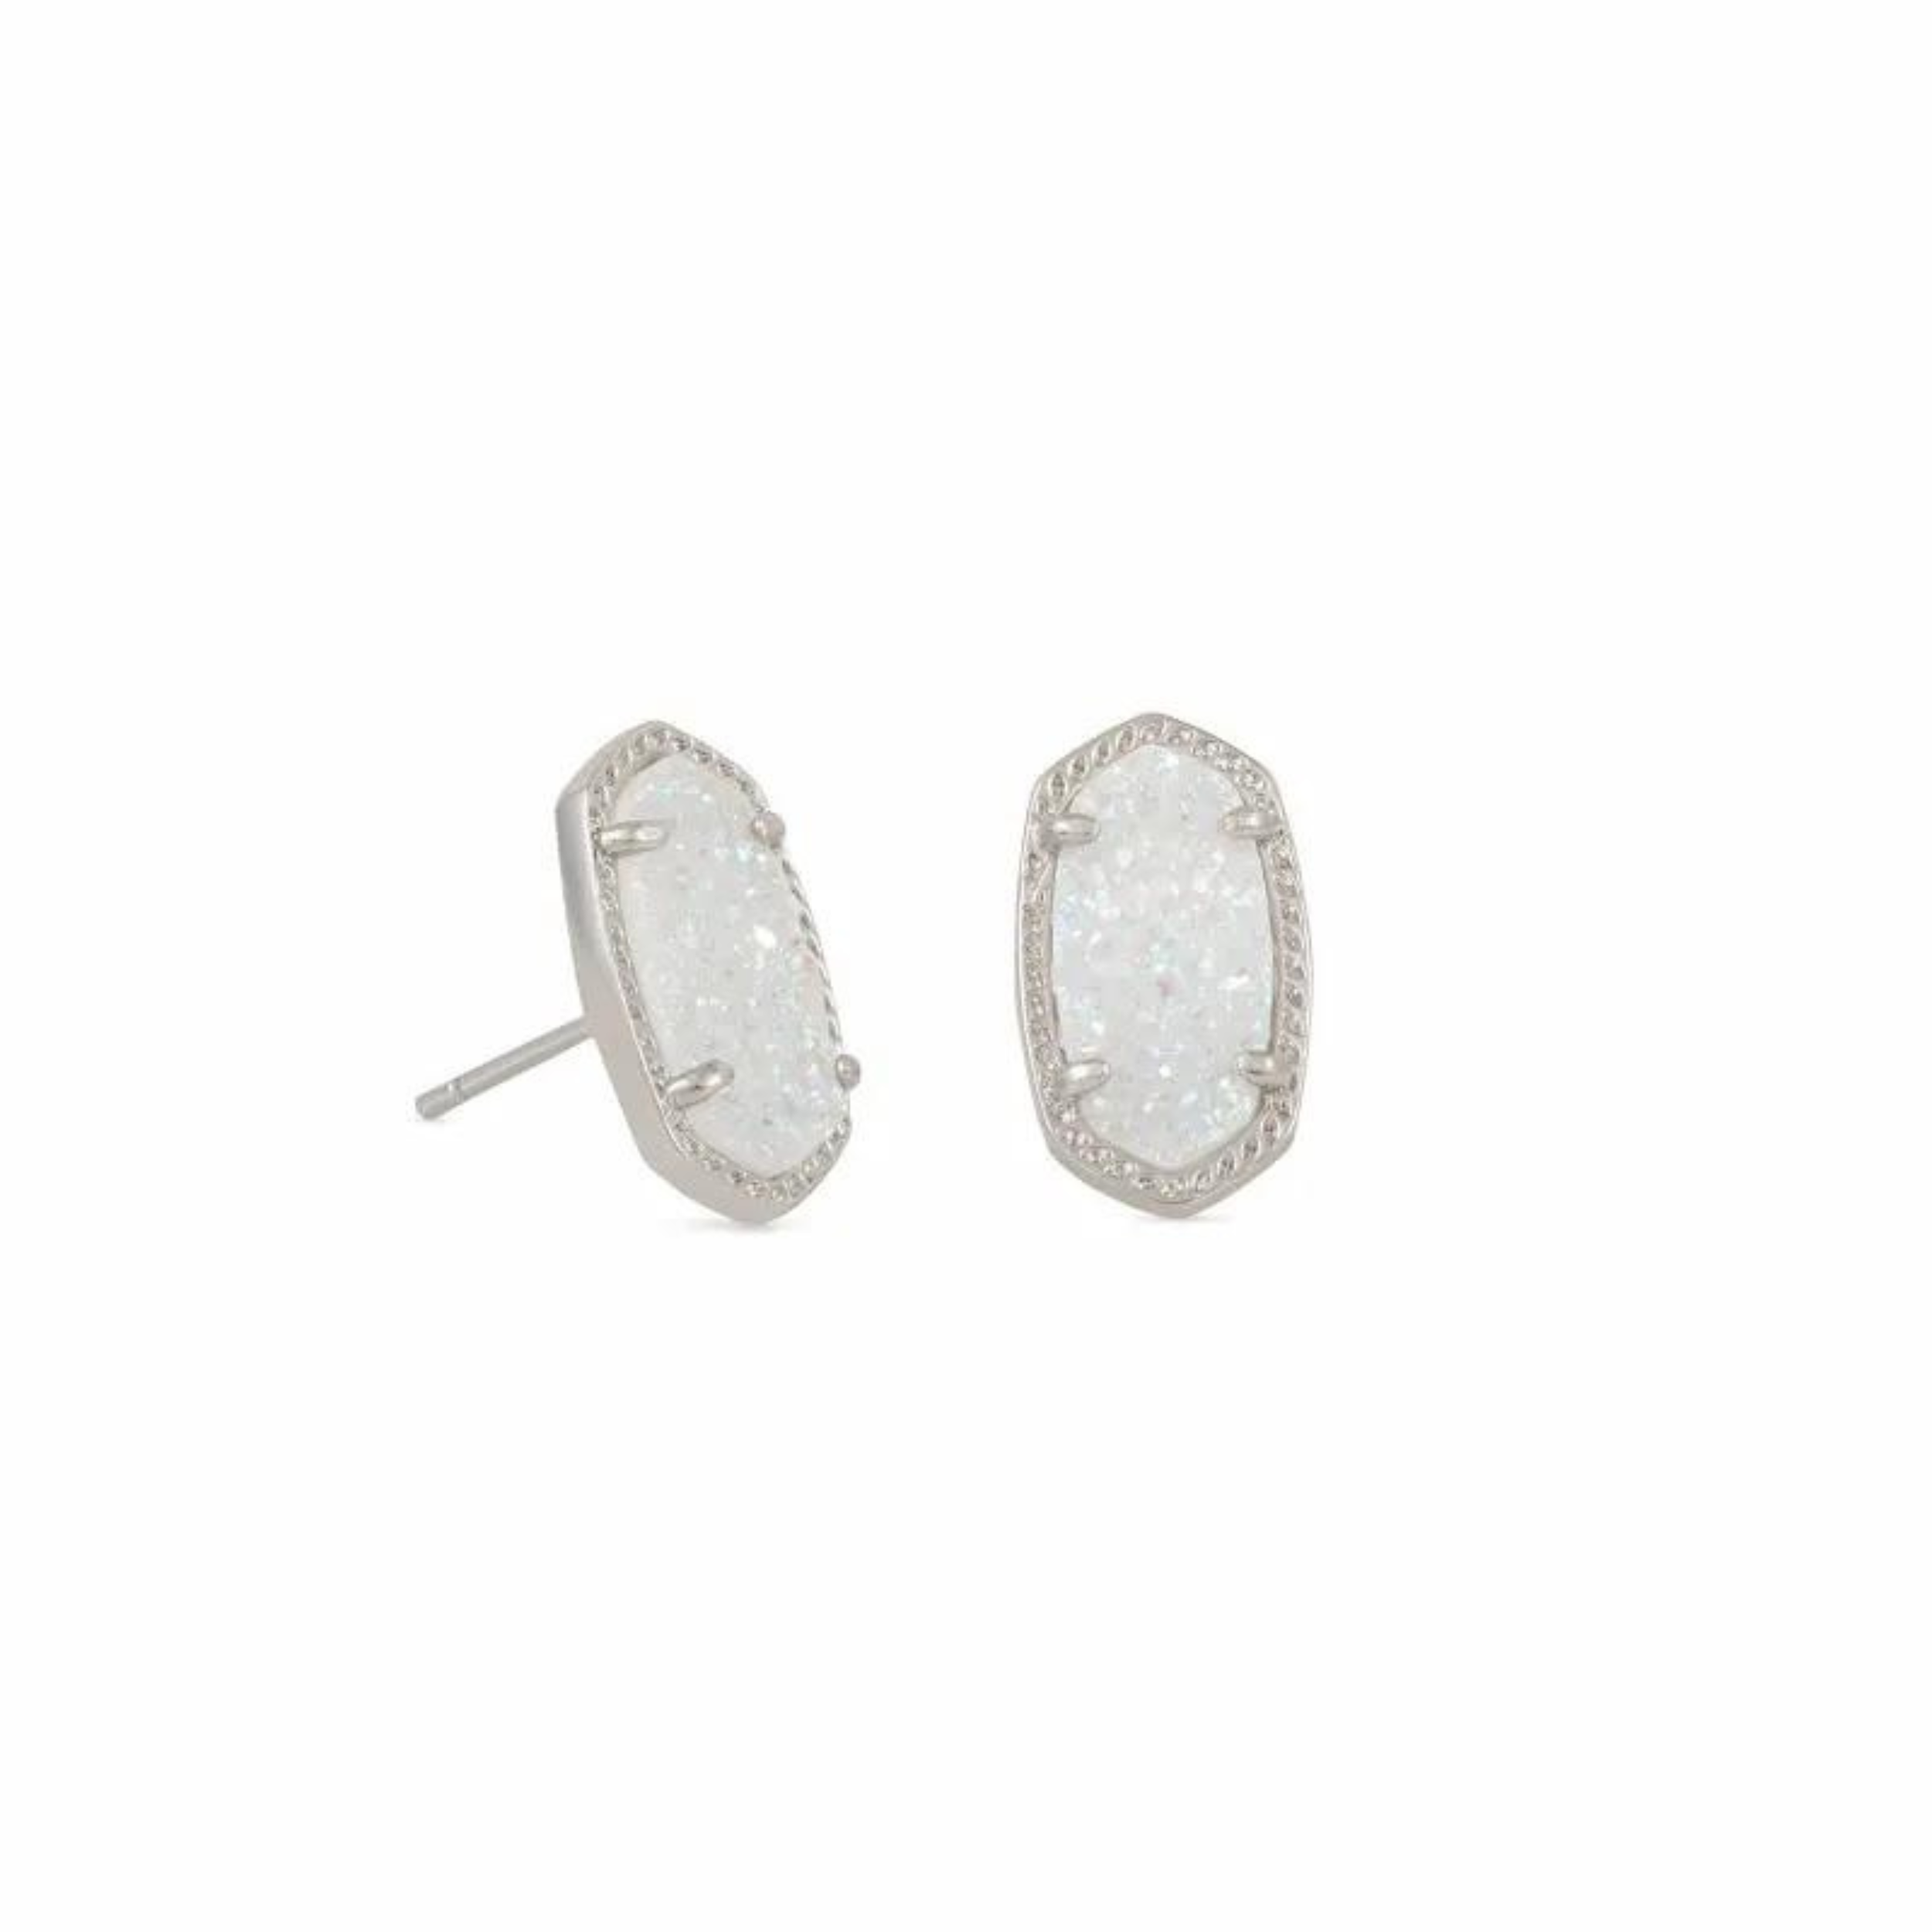 There are silver stud earrings in iridescent drusy.